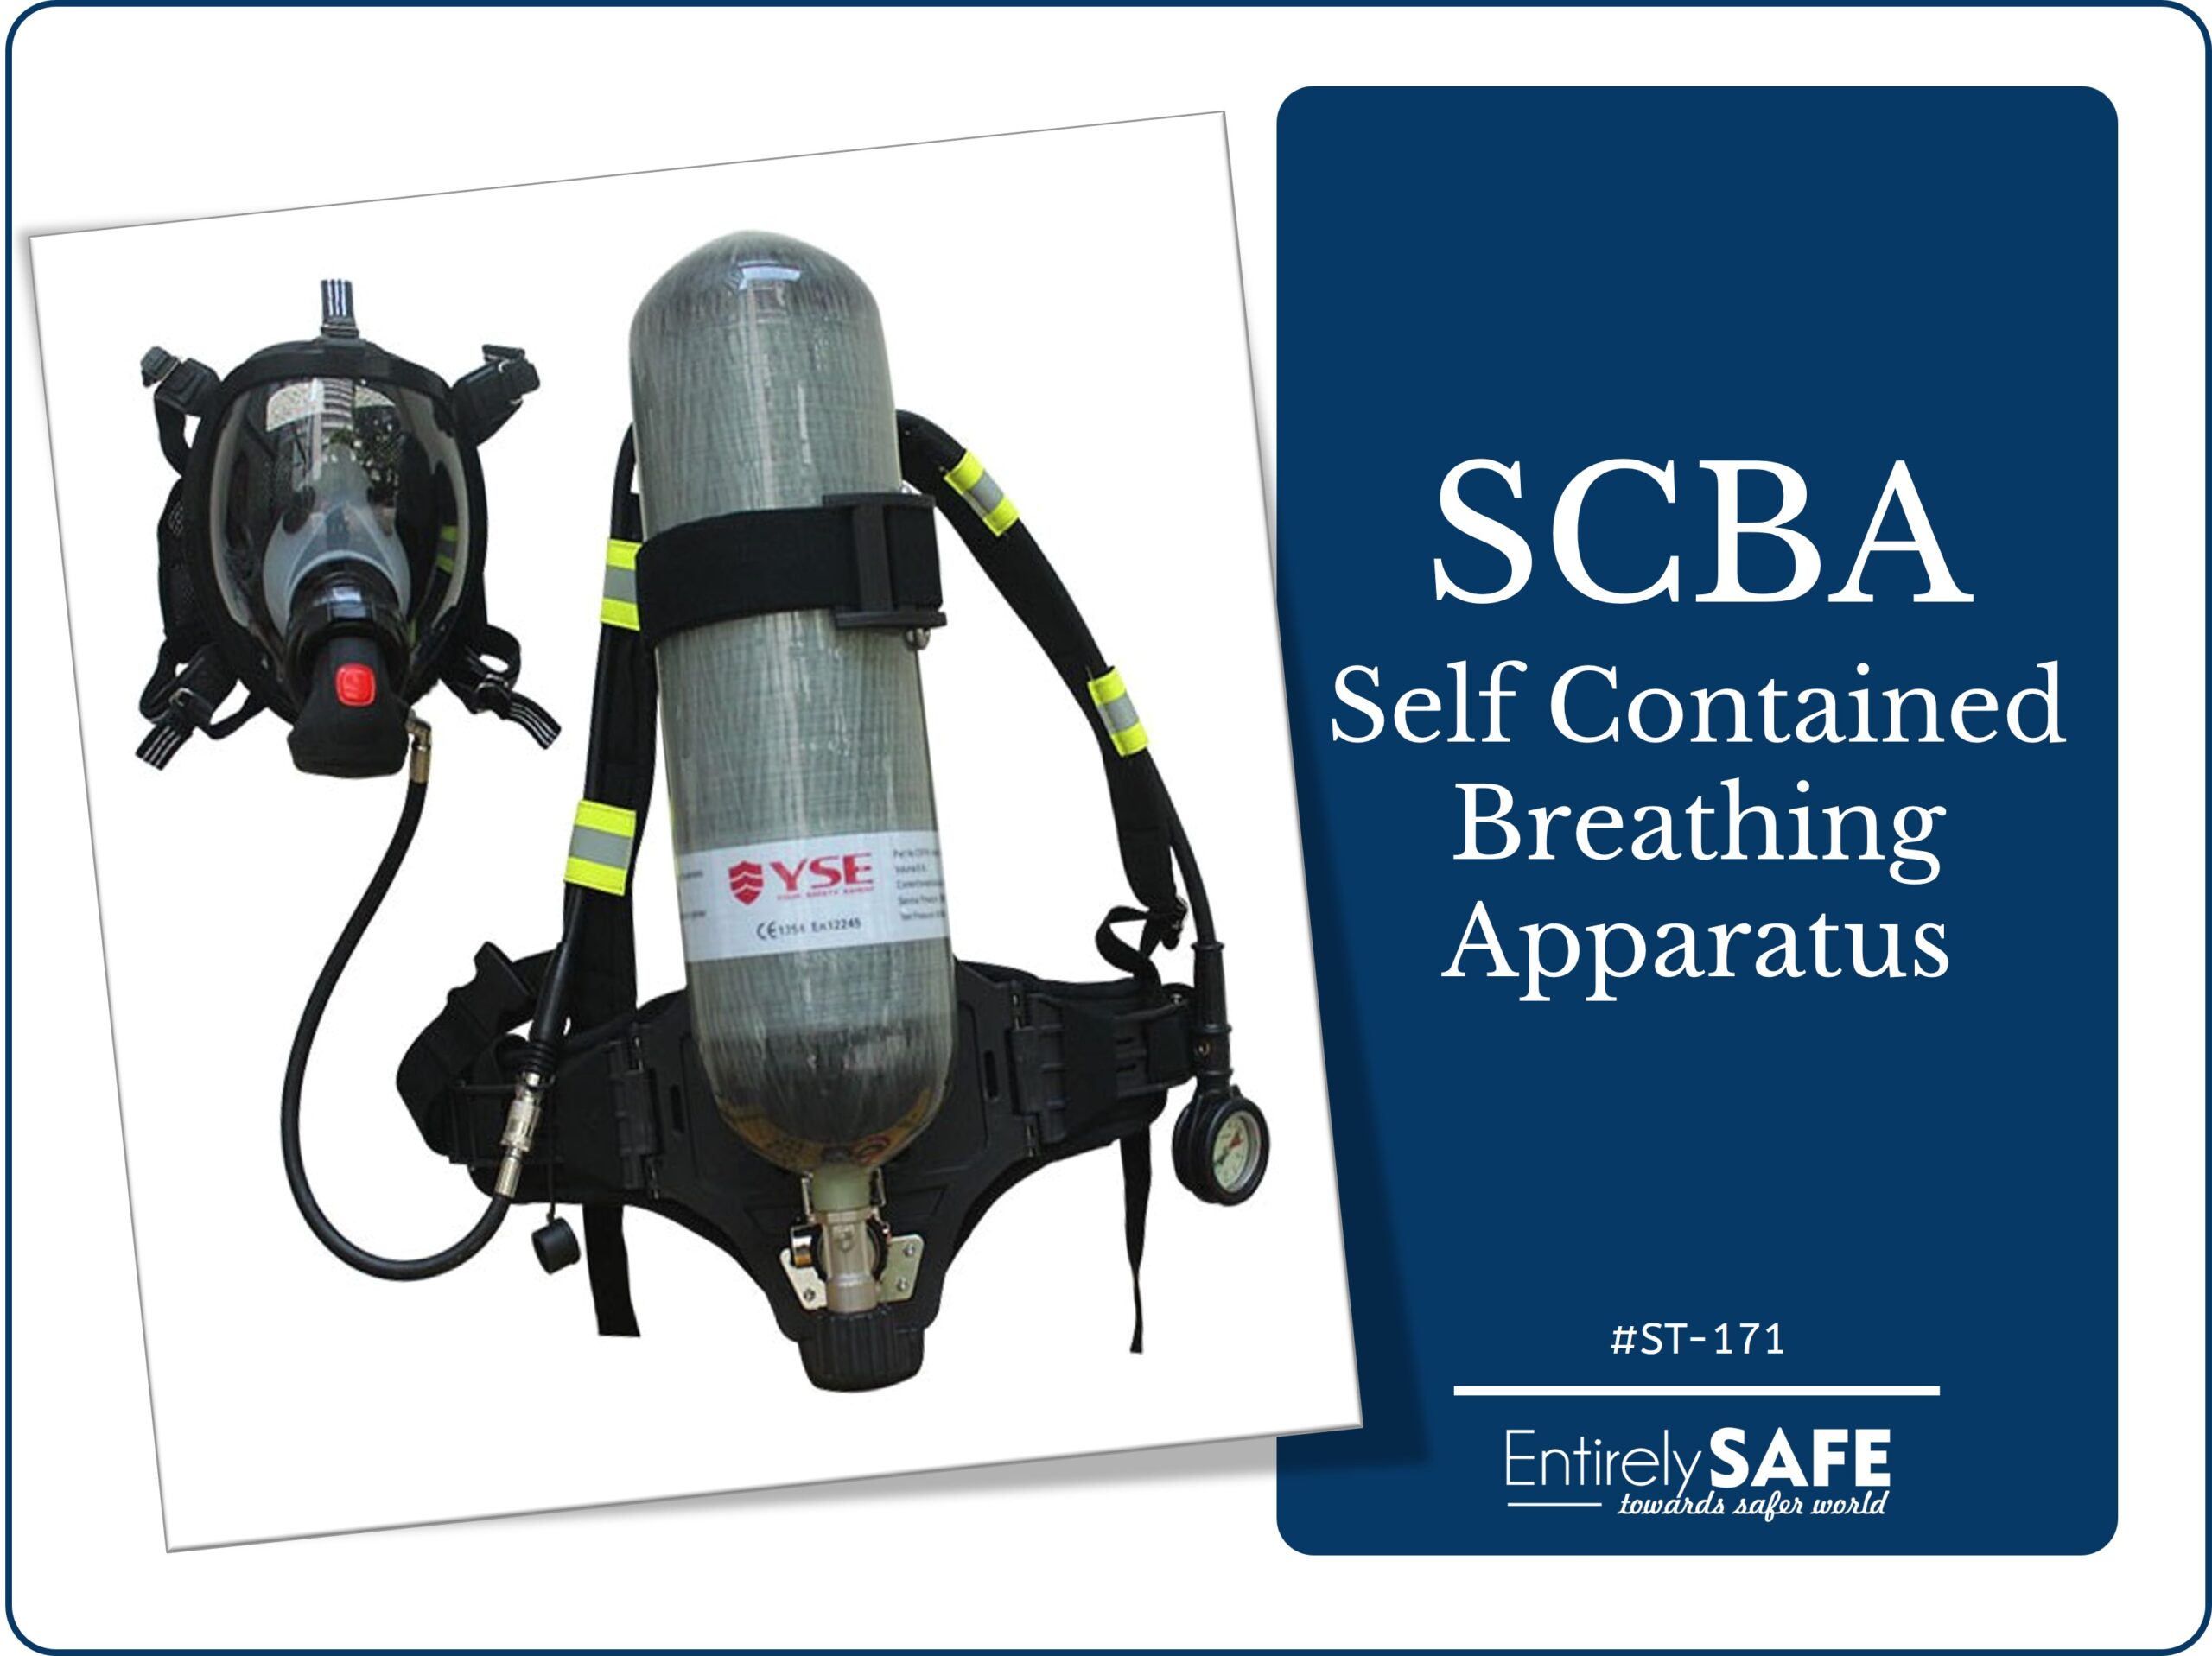 ST-171-SCBA-Self-Contained-Breathing-Apparatus